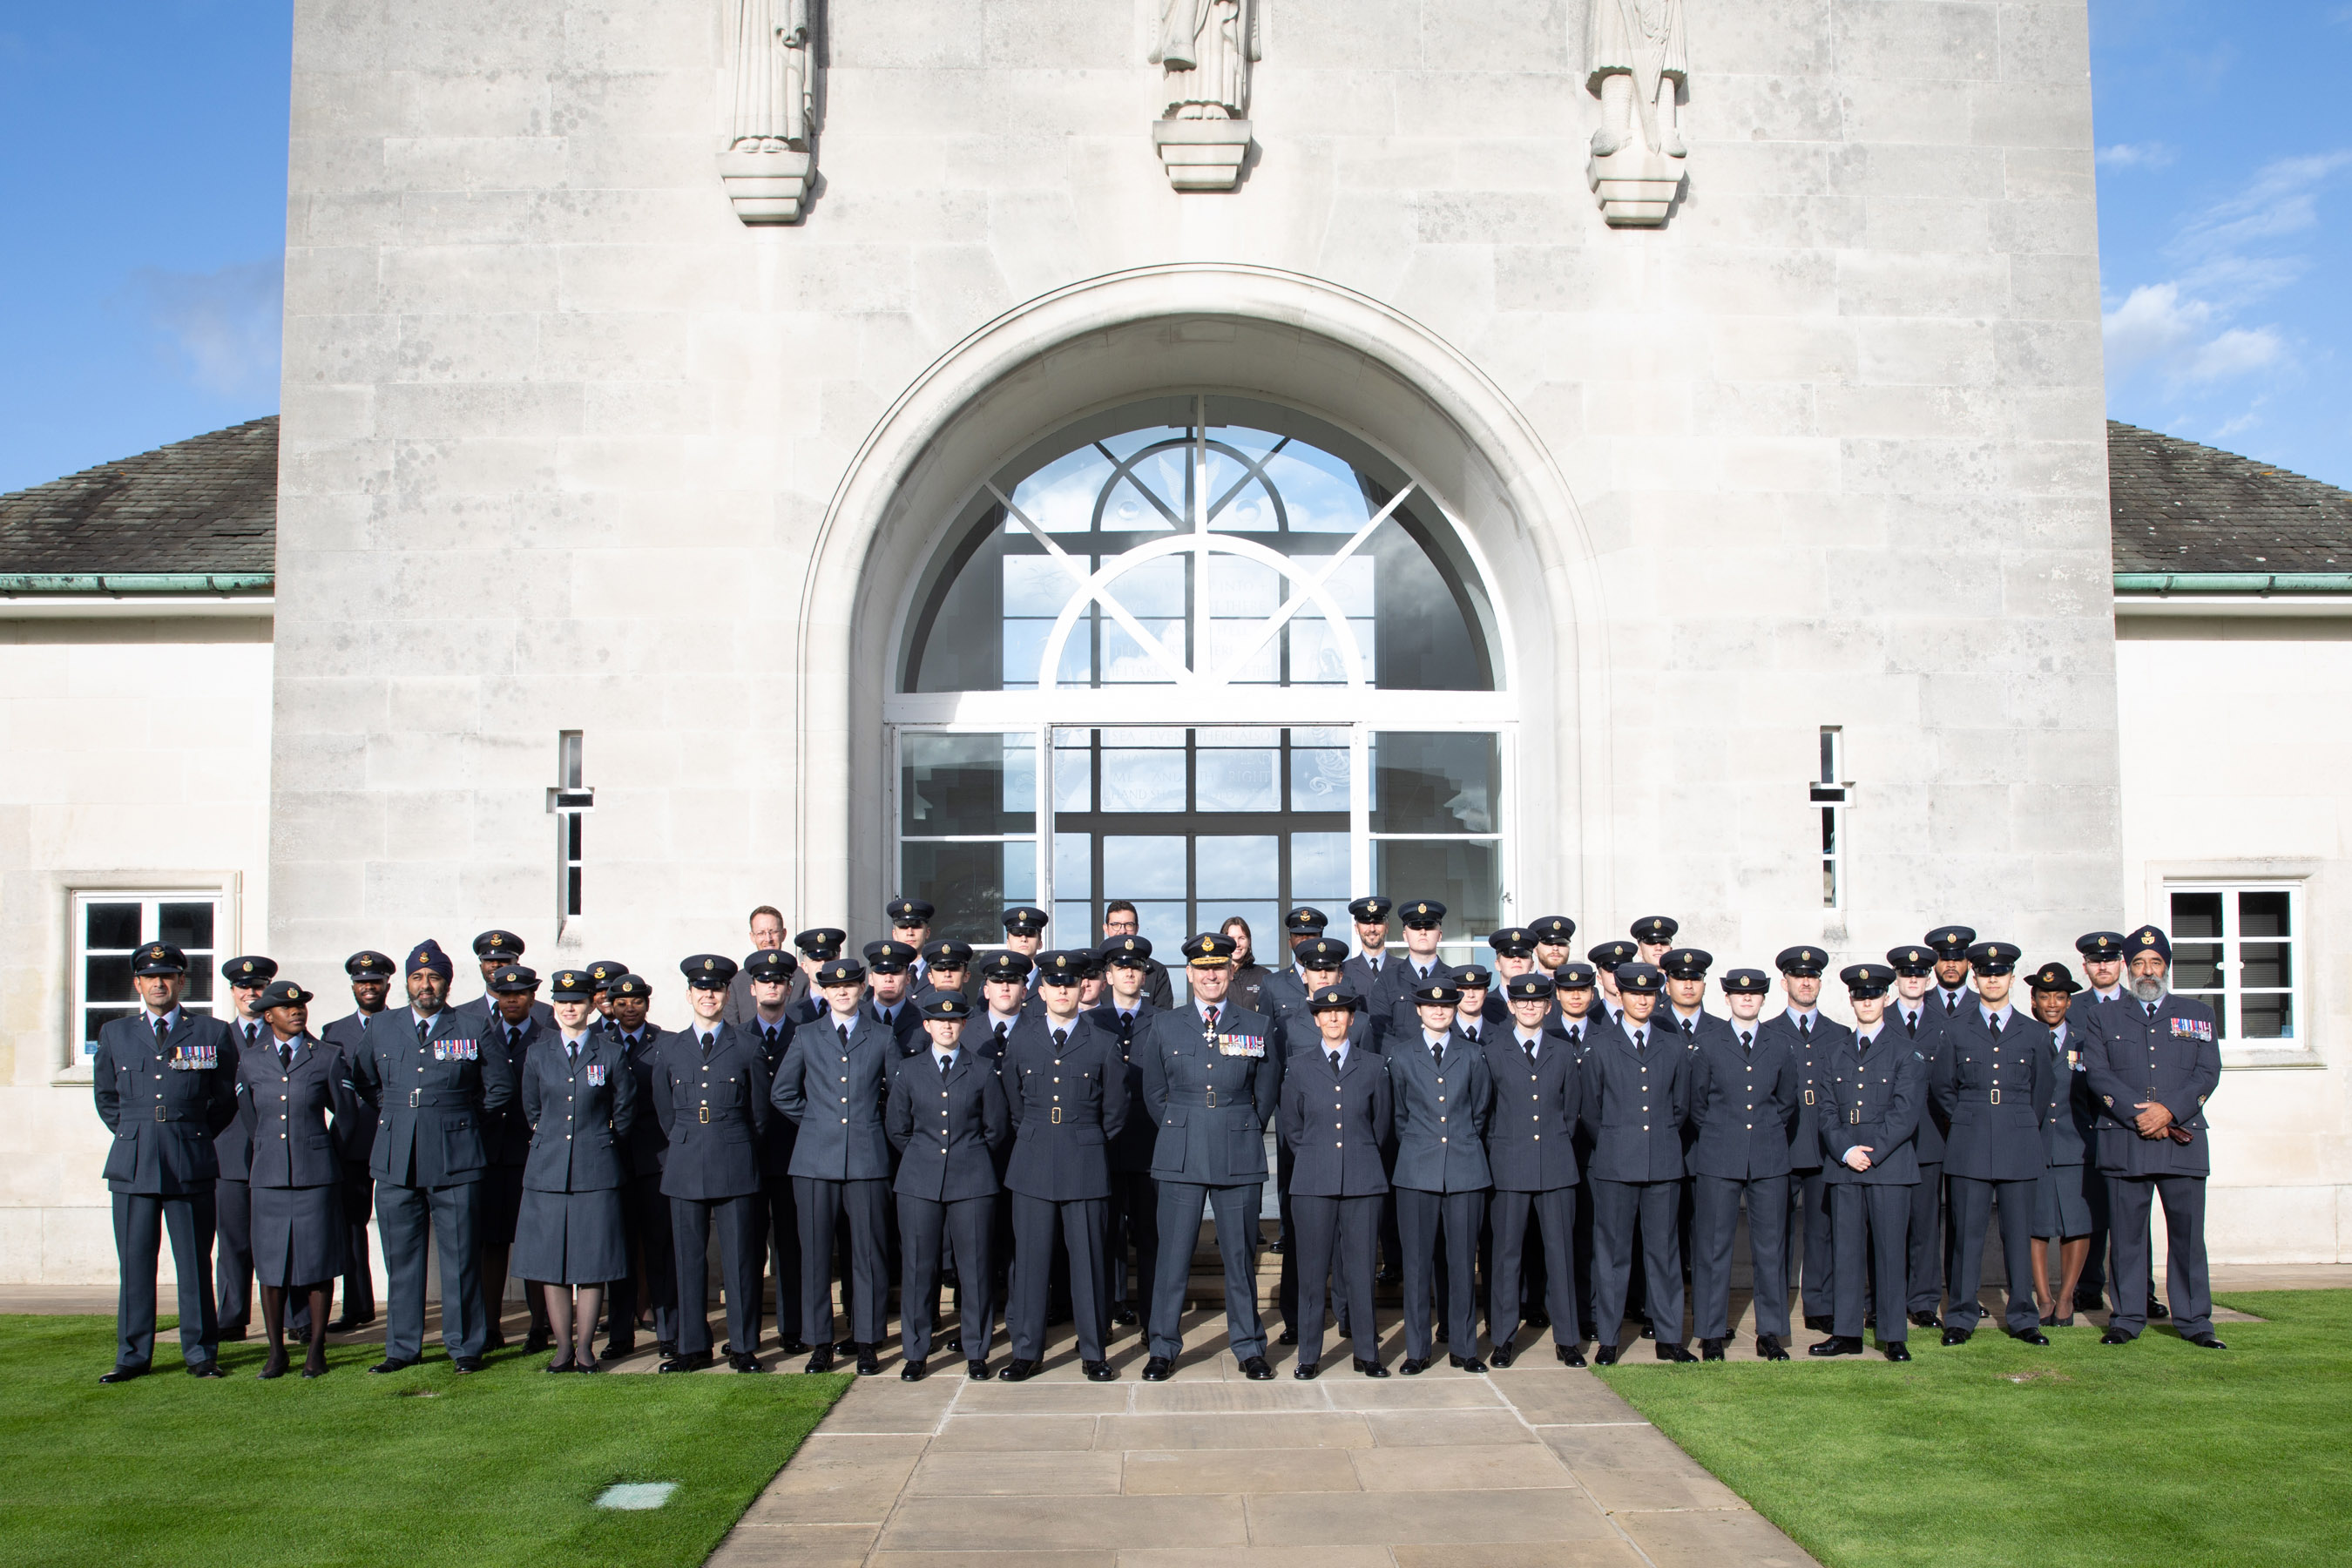 Image shows personnel at Runnymede memorial.